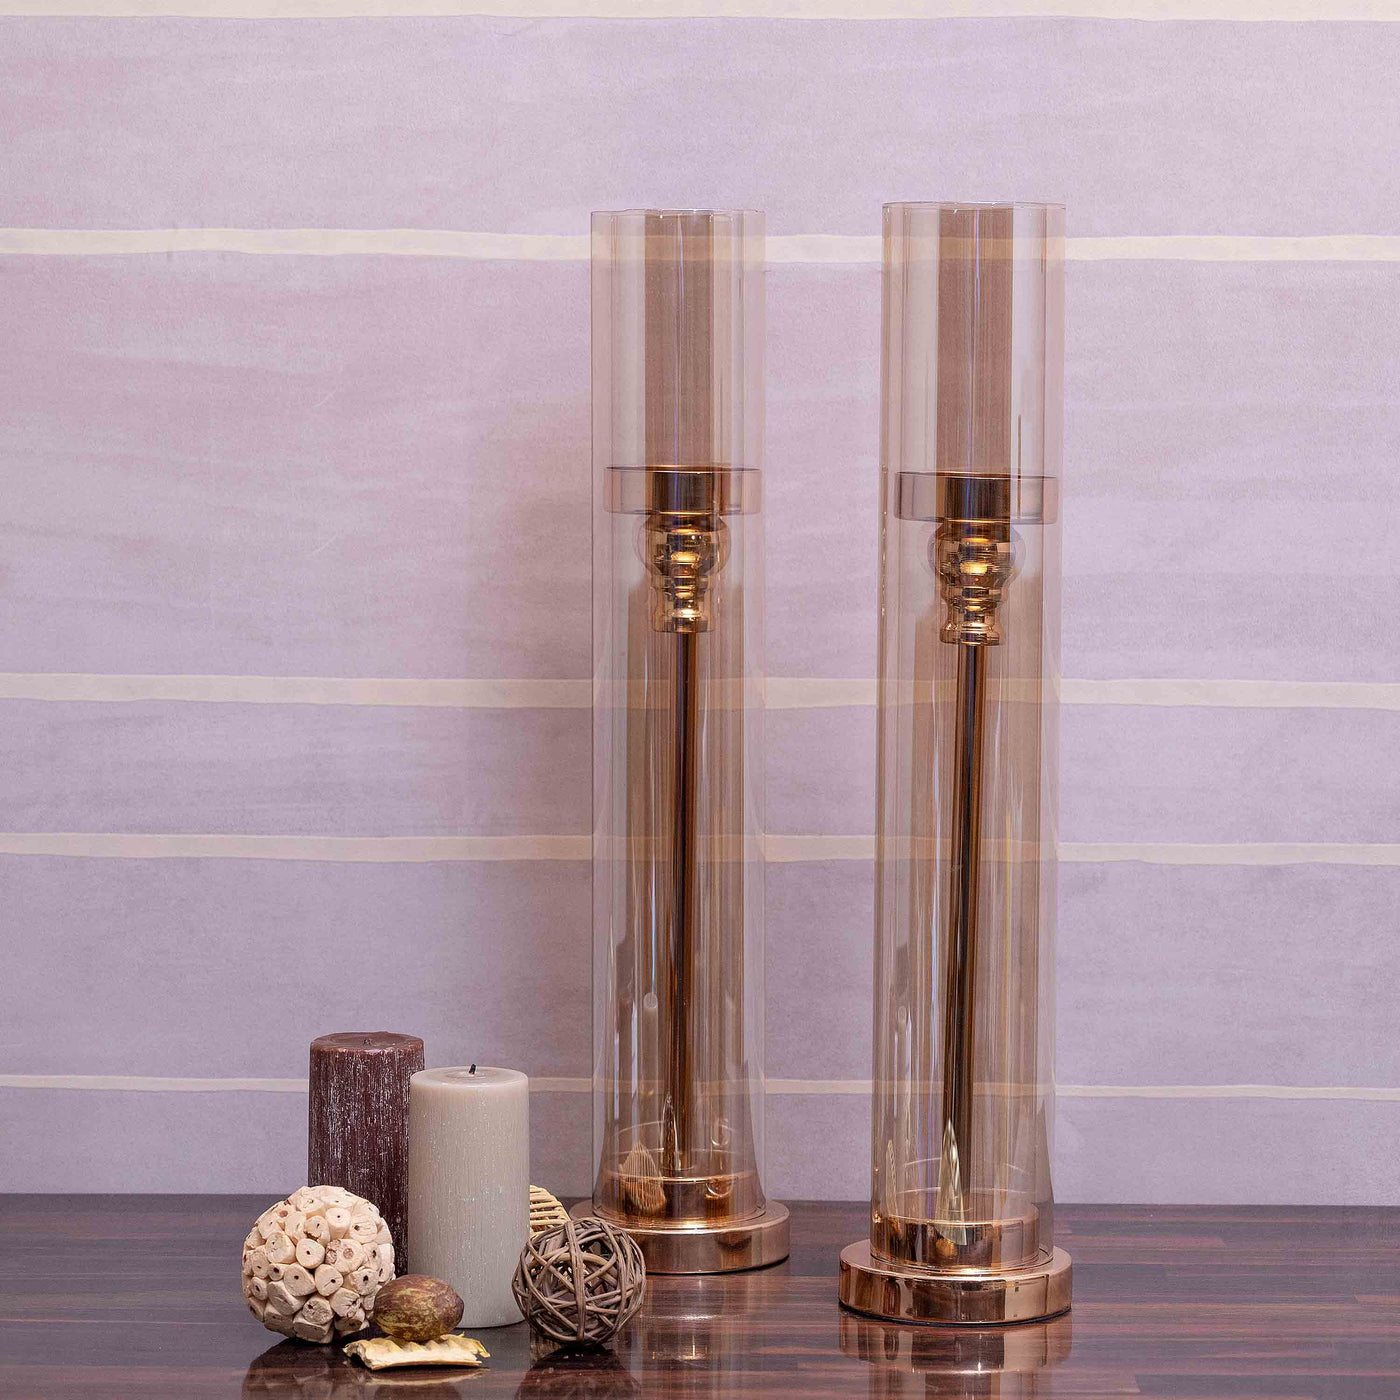 Gold decorative candle stands by Home 360